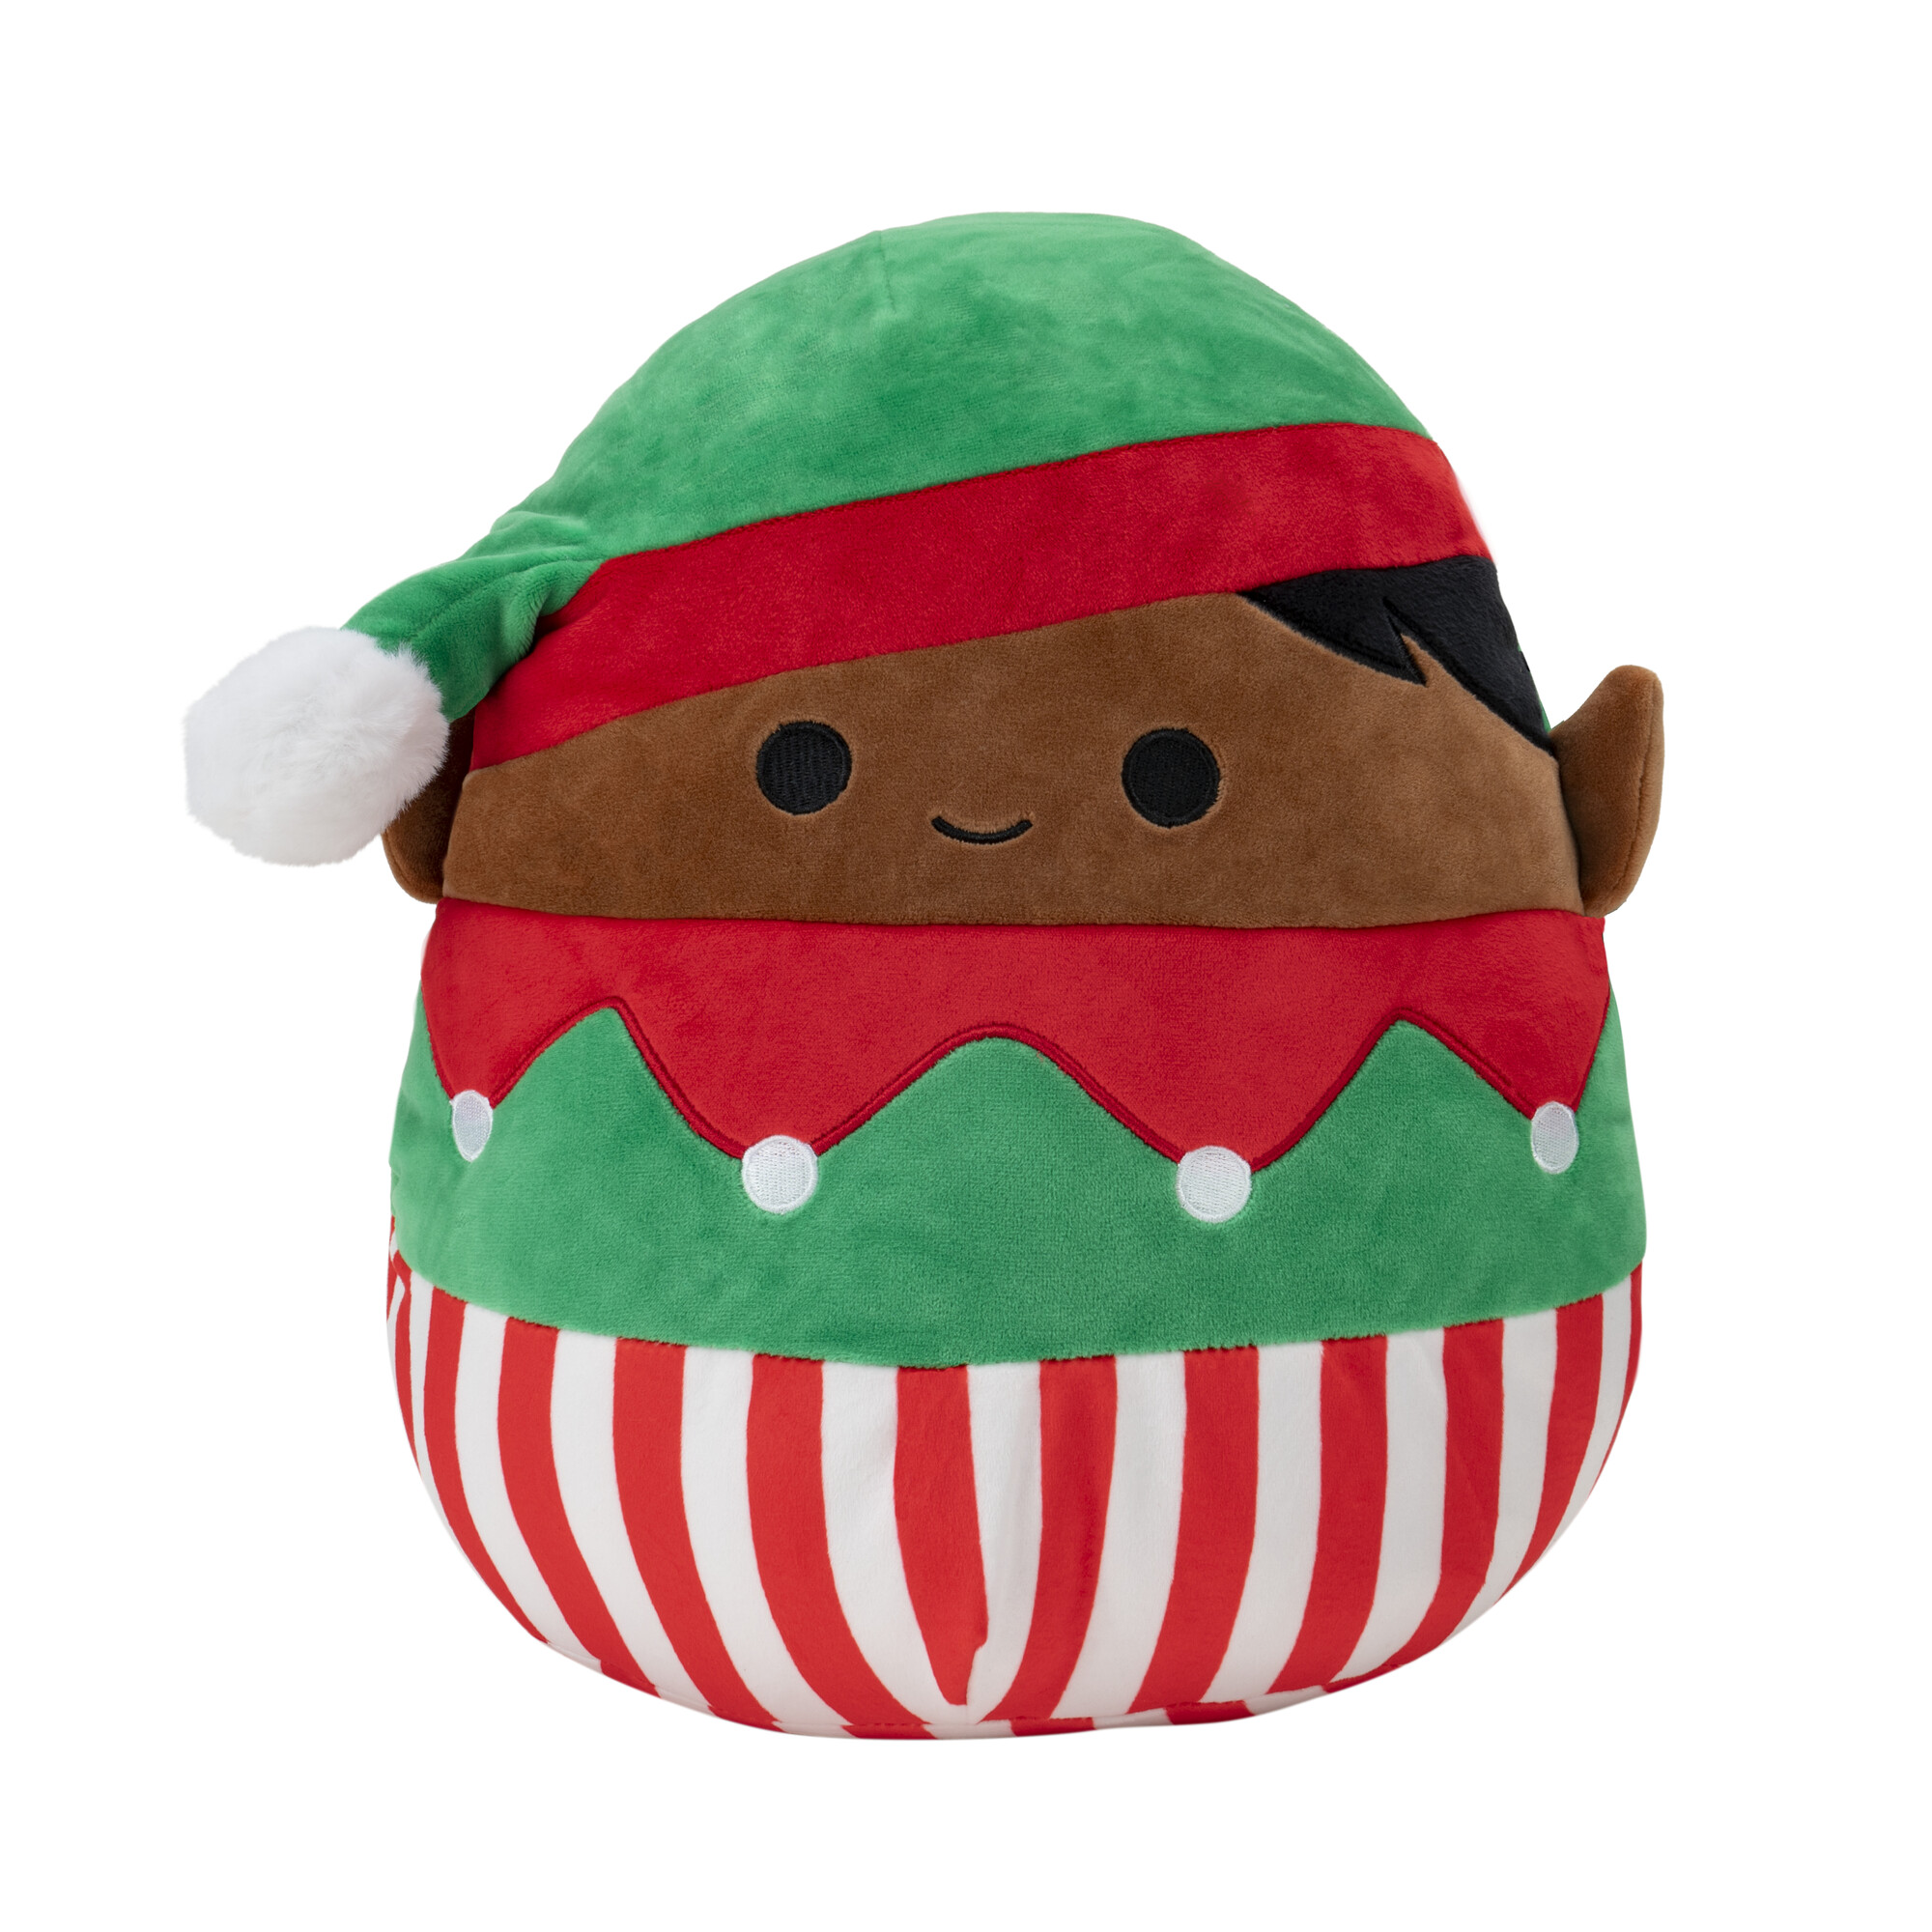 Squishmallows 12 inch Ezrah the Red and Green Elf Boy - Child's Ultra Soft Stuffed Plush Toy - image 1 of 7